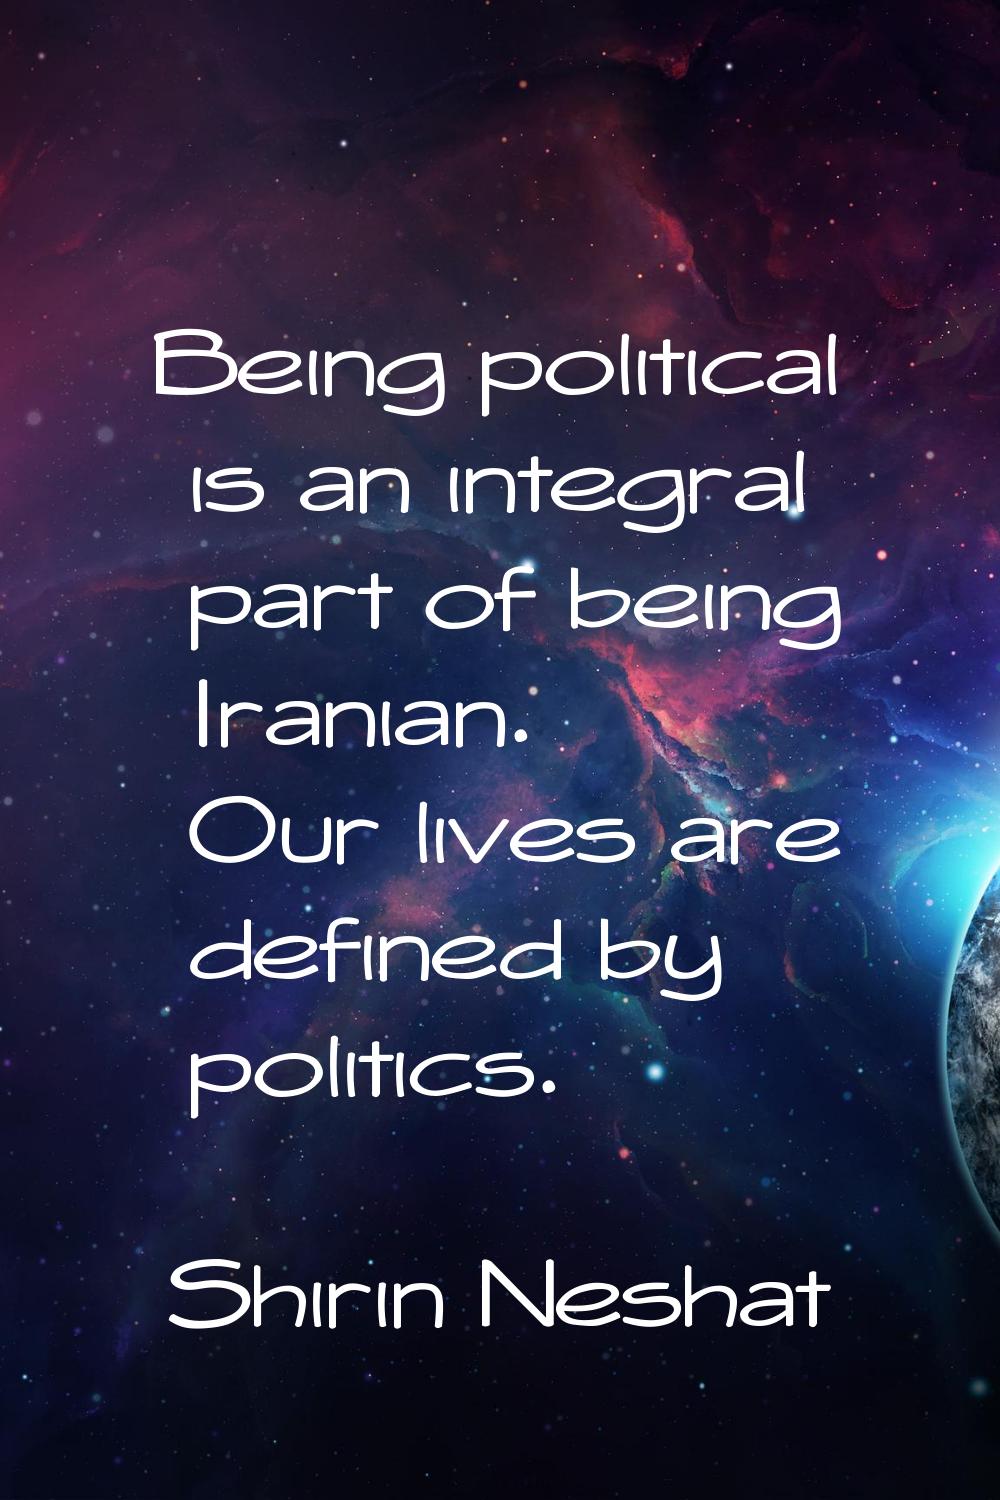 Being political is an integral part of being Iranian. Our lives are defined by politics.